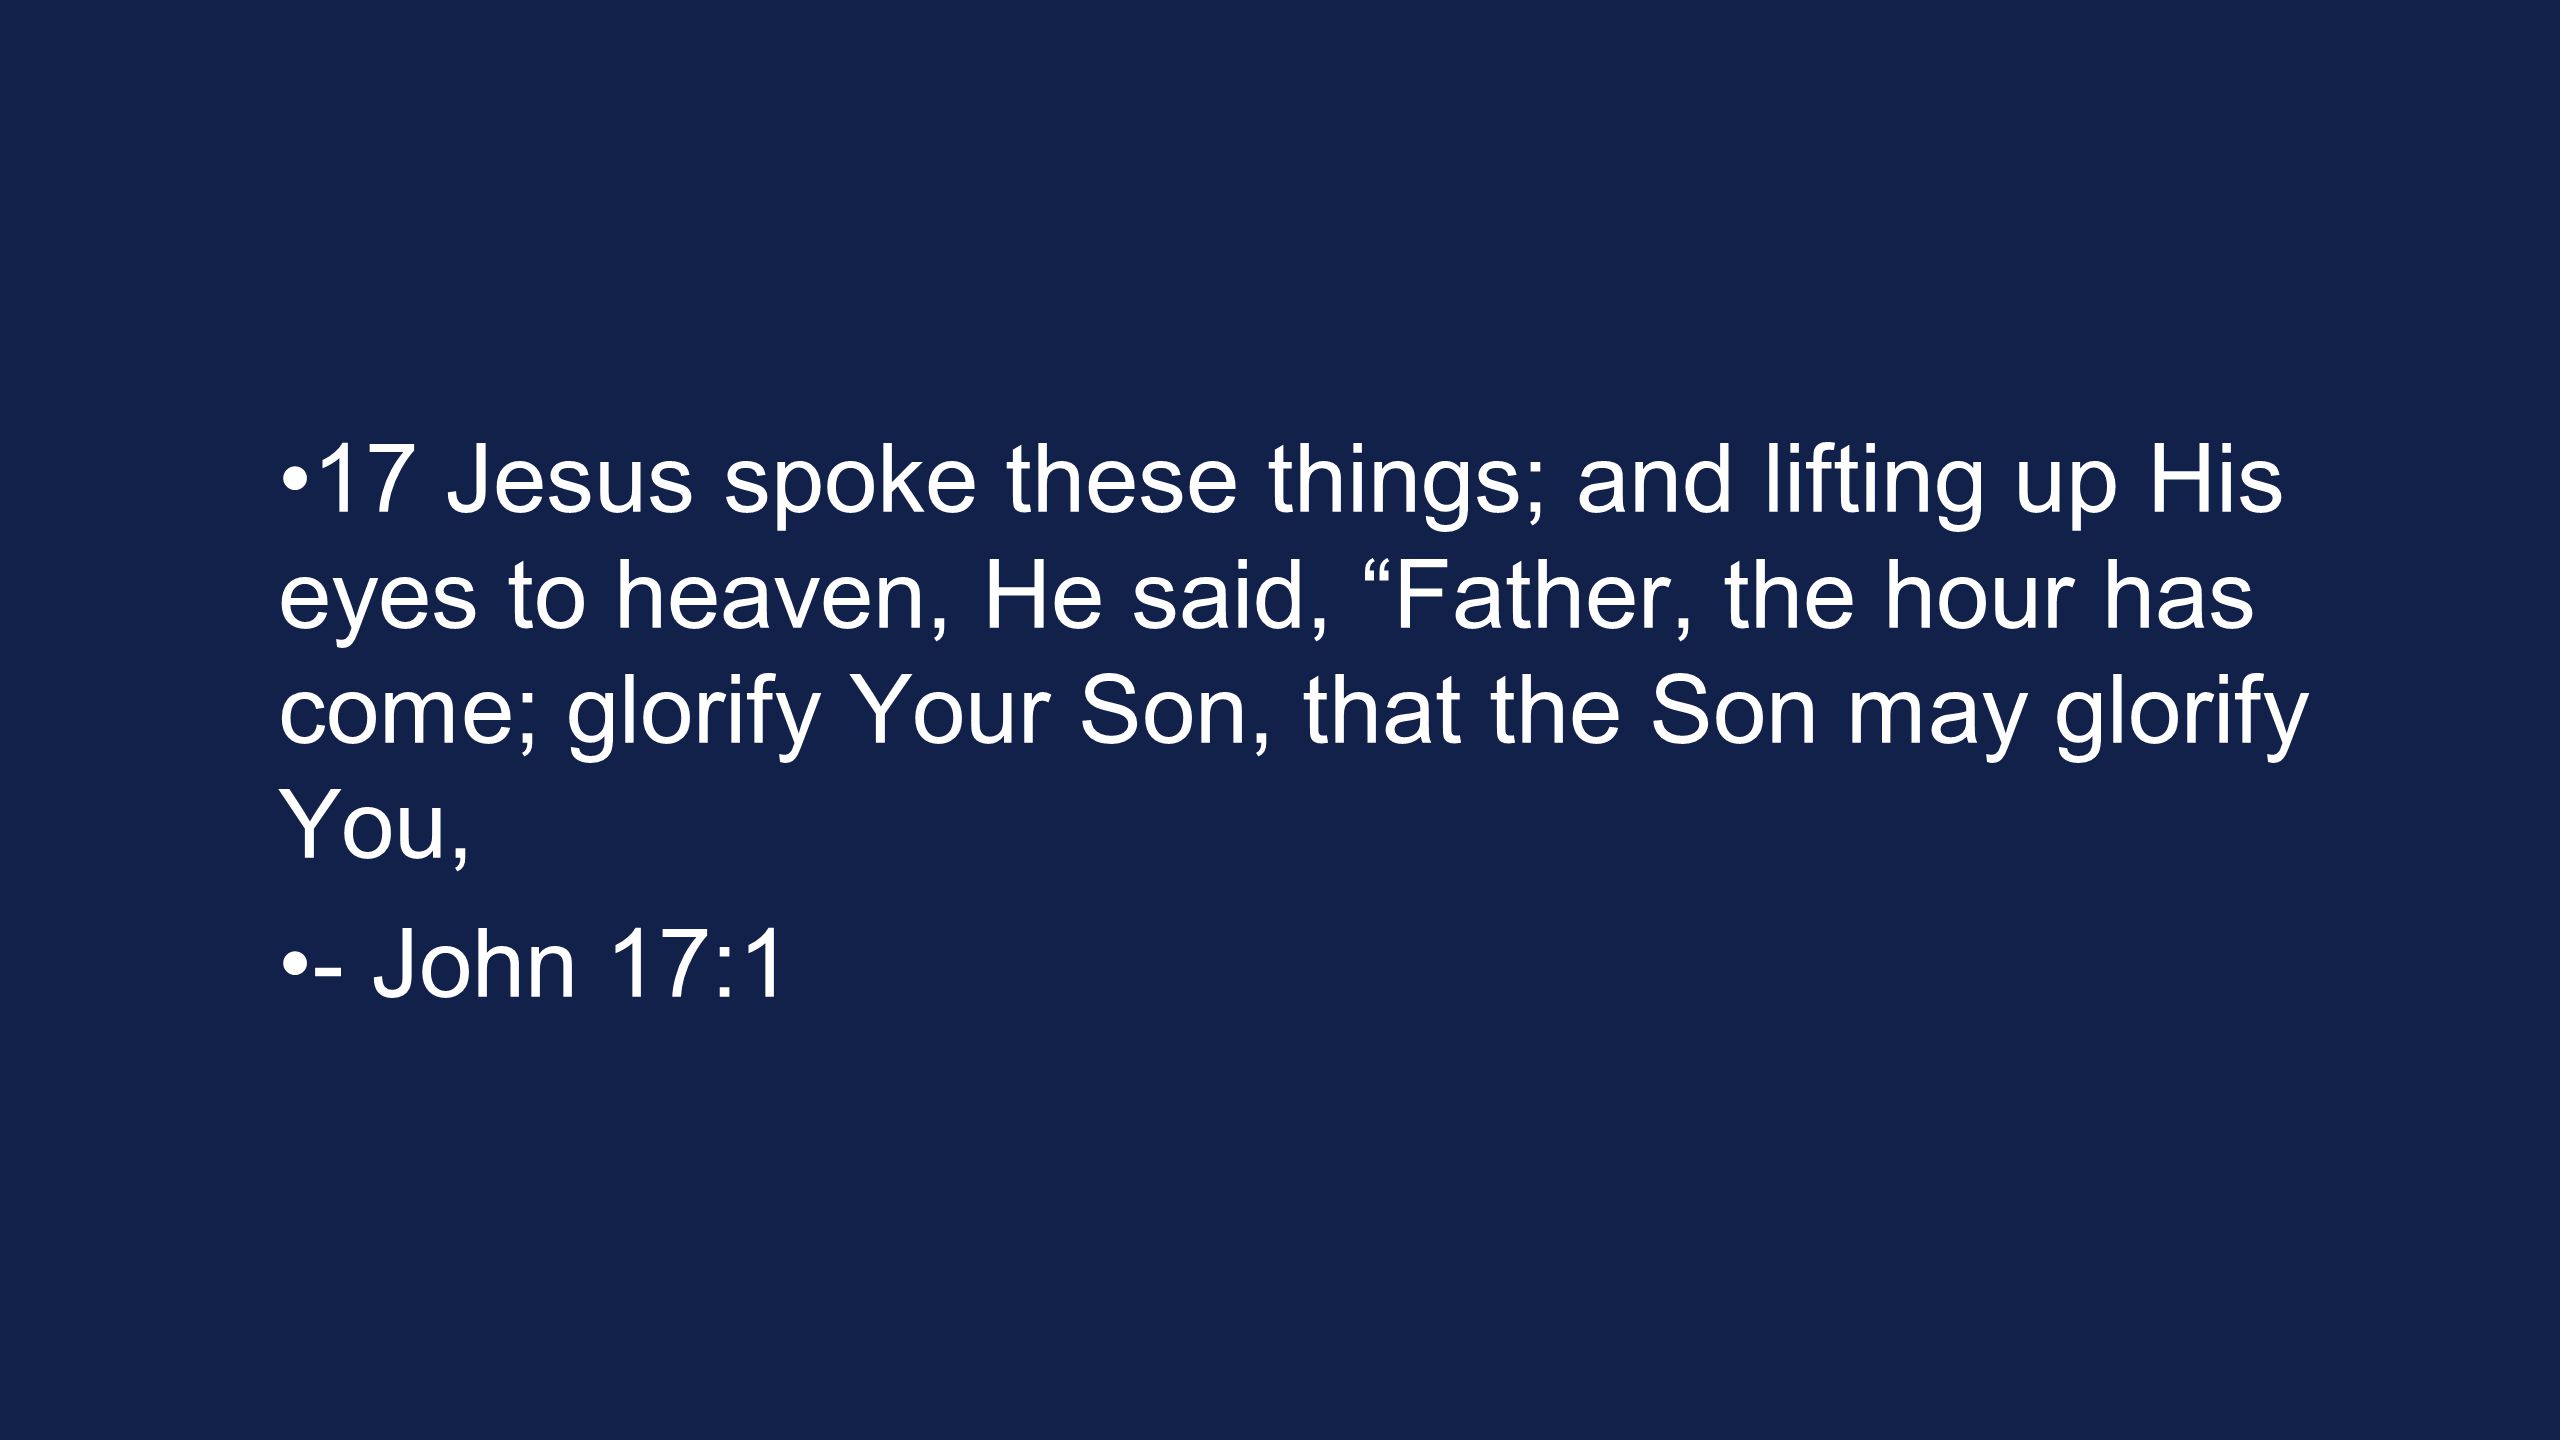 17 Jesus spoke these things; and lifting up His eyes to heaven, He said, Father, the hour has come; glorify Your Son, that the Son may glorify You,